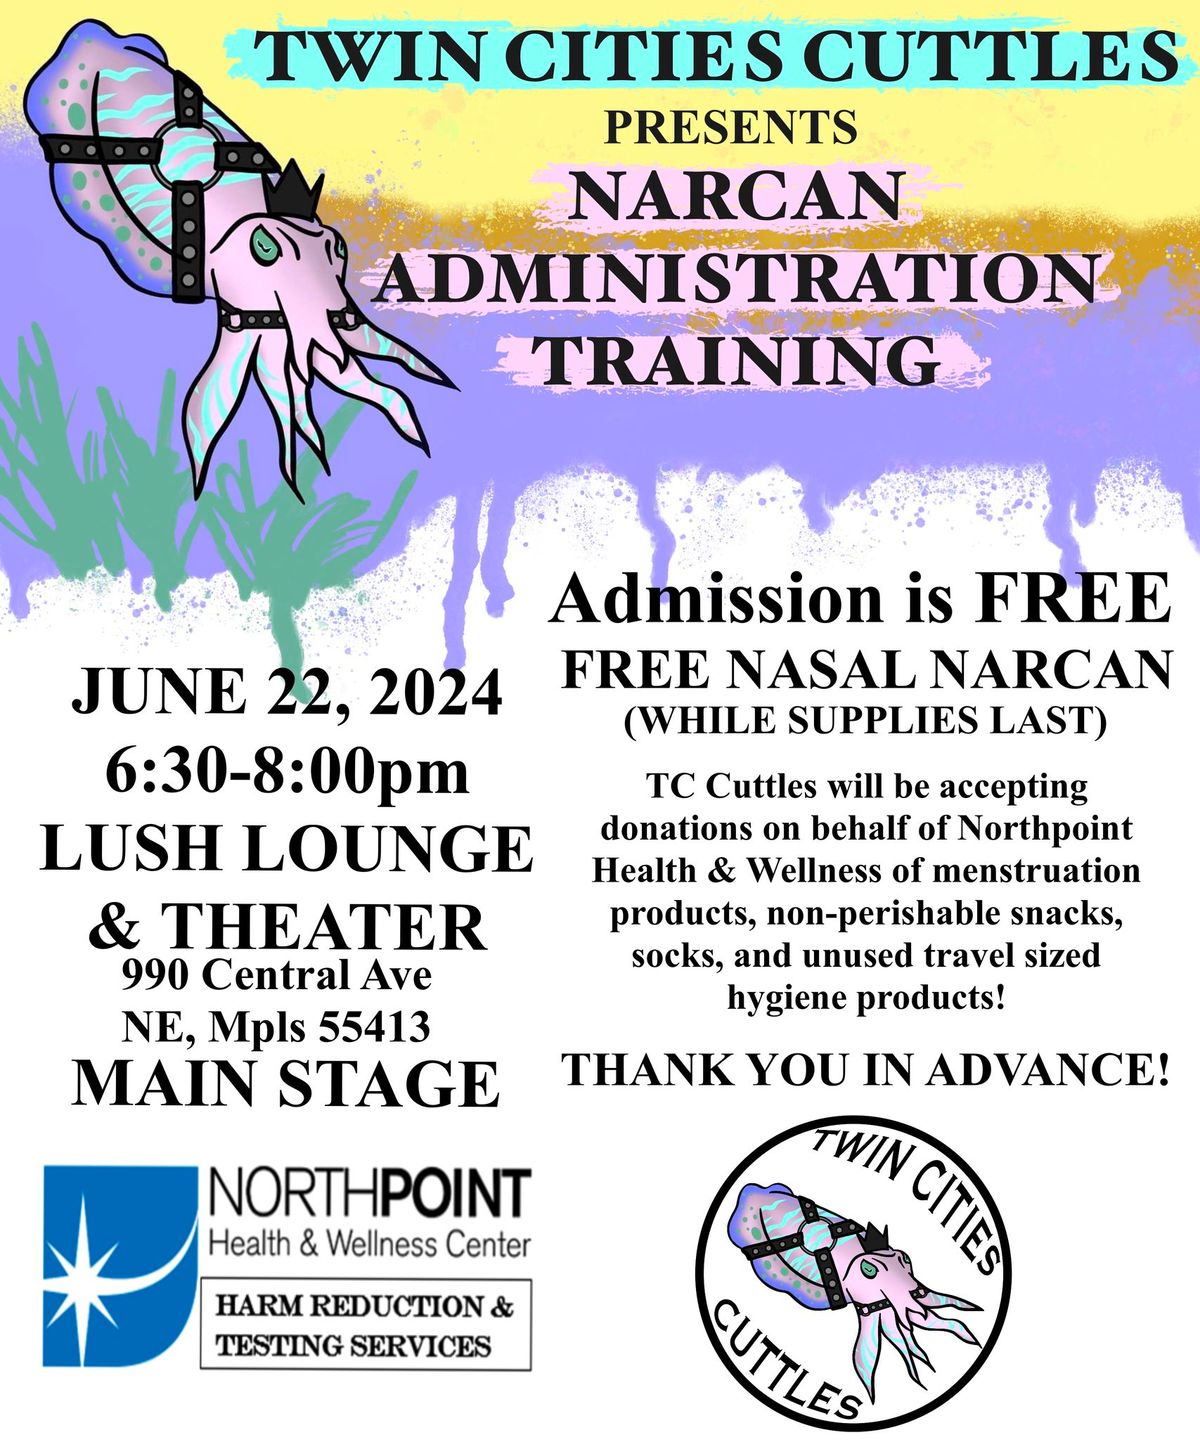 Twin Cities Cuttles Presents Narcan Administration Training!